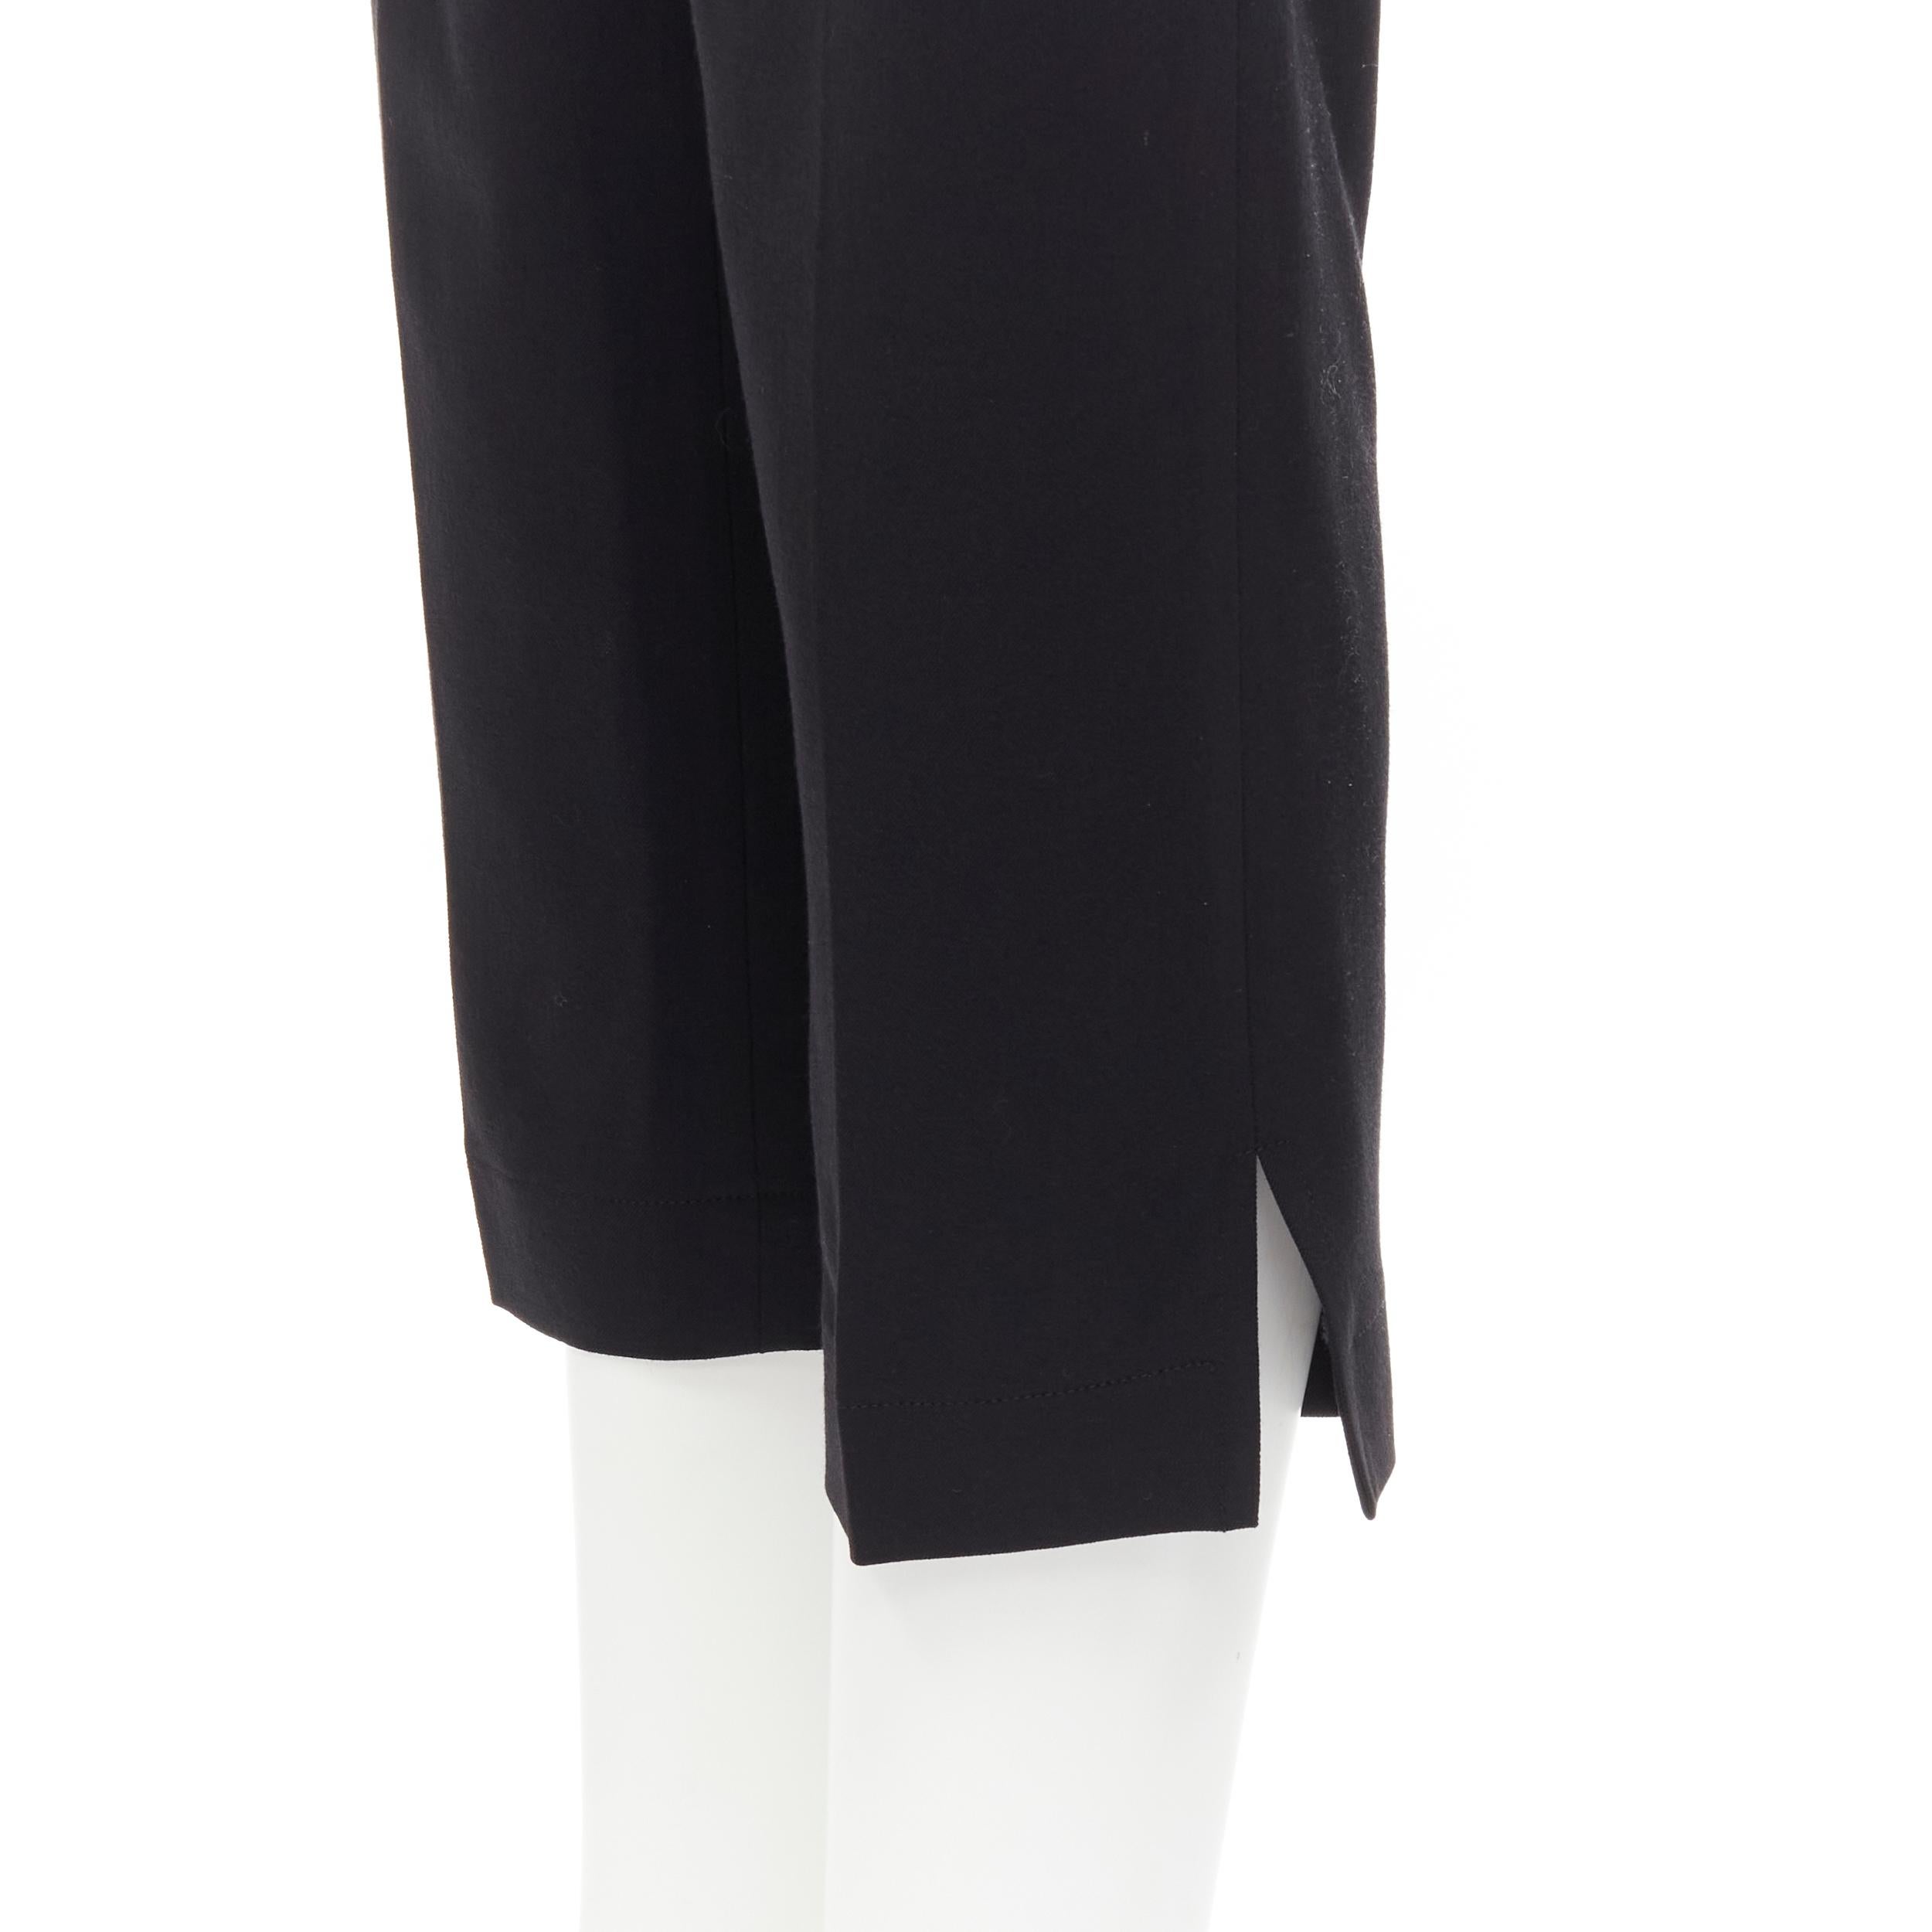 GIANNI VERSACE Vintage black viscose wool high waisted slit trousers IT38 XS 
Reference: LNKO/A01969 
Brand: Gianni Versace 
Material: Viscose
Color: Black 
Pattern: Solid 
Closure: Zip 
Extra Detail: High waisted. Dual front pockets. 
Made in: